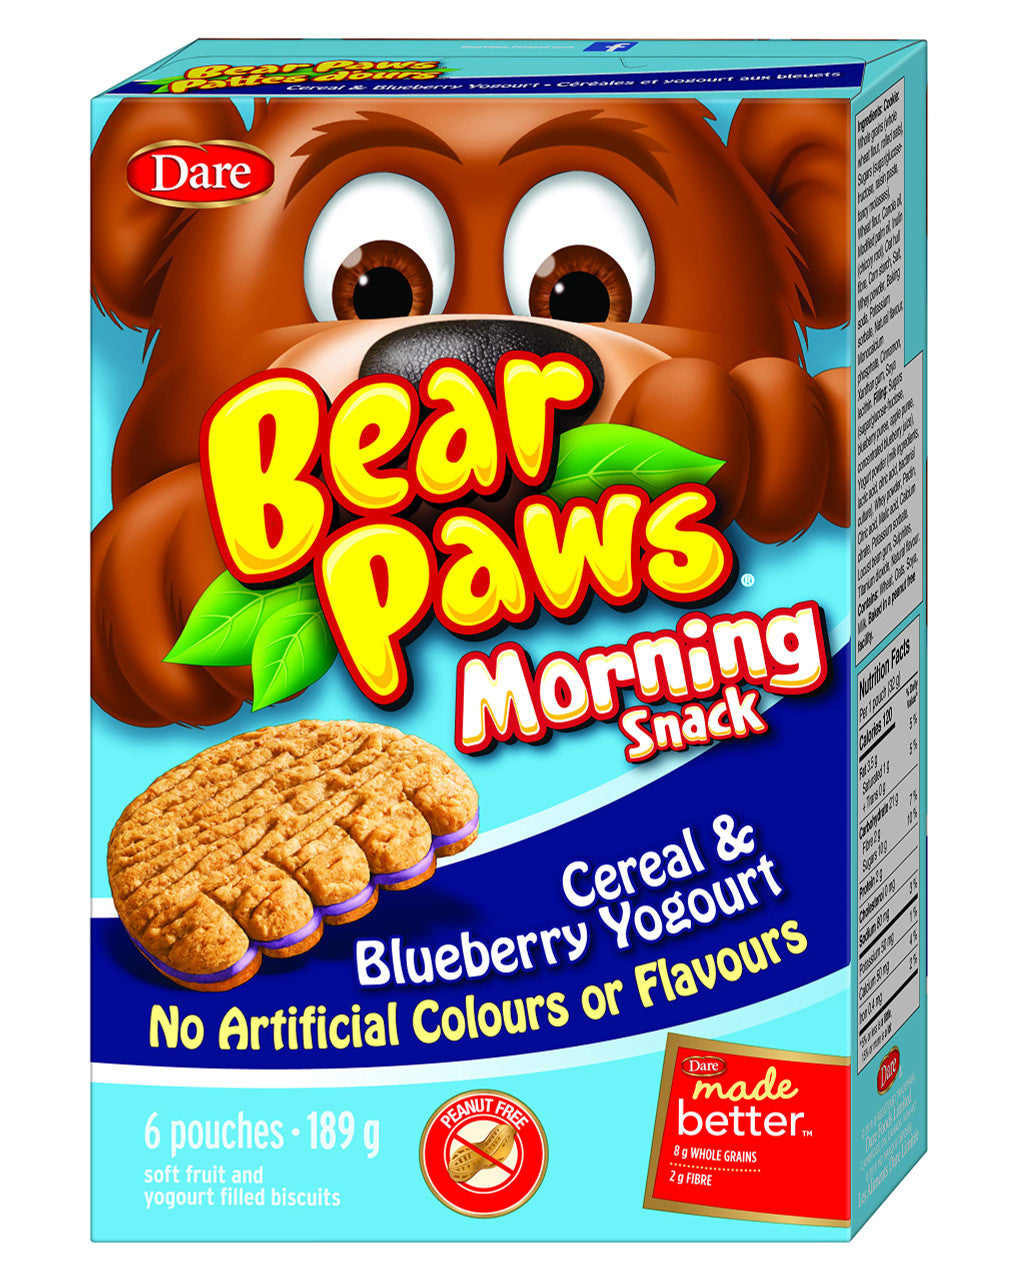 Dare Bear Paws Morning Snack Blueberry Cereal & Yogurt, 189g {Imported from Canada}